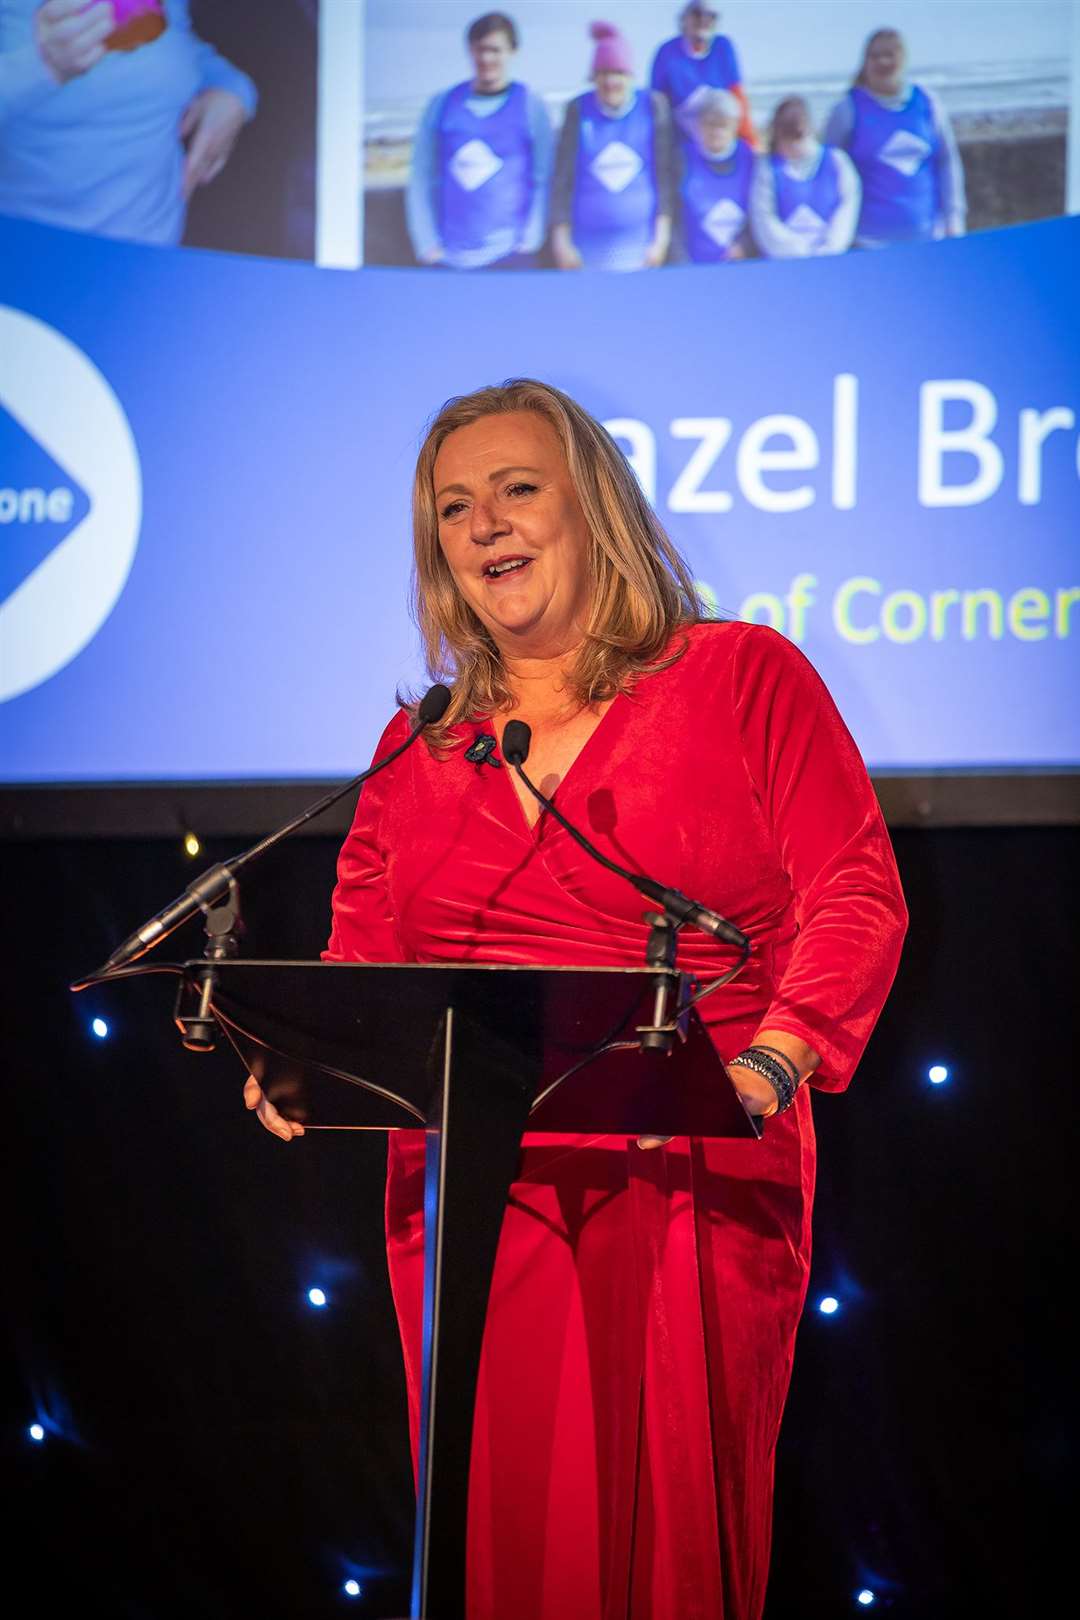 Hazel Brown, CEO of Cornerstone. Pictures by: Eoghan Smith.